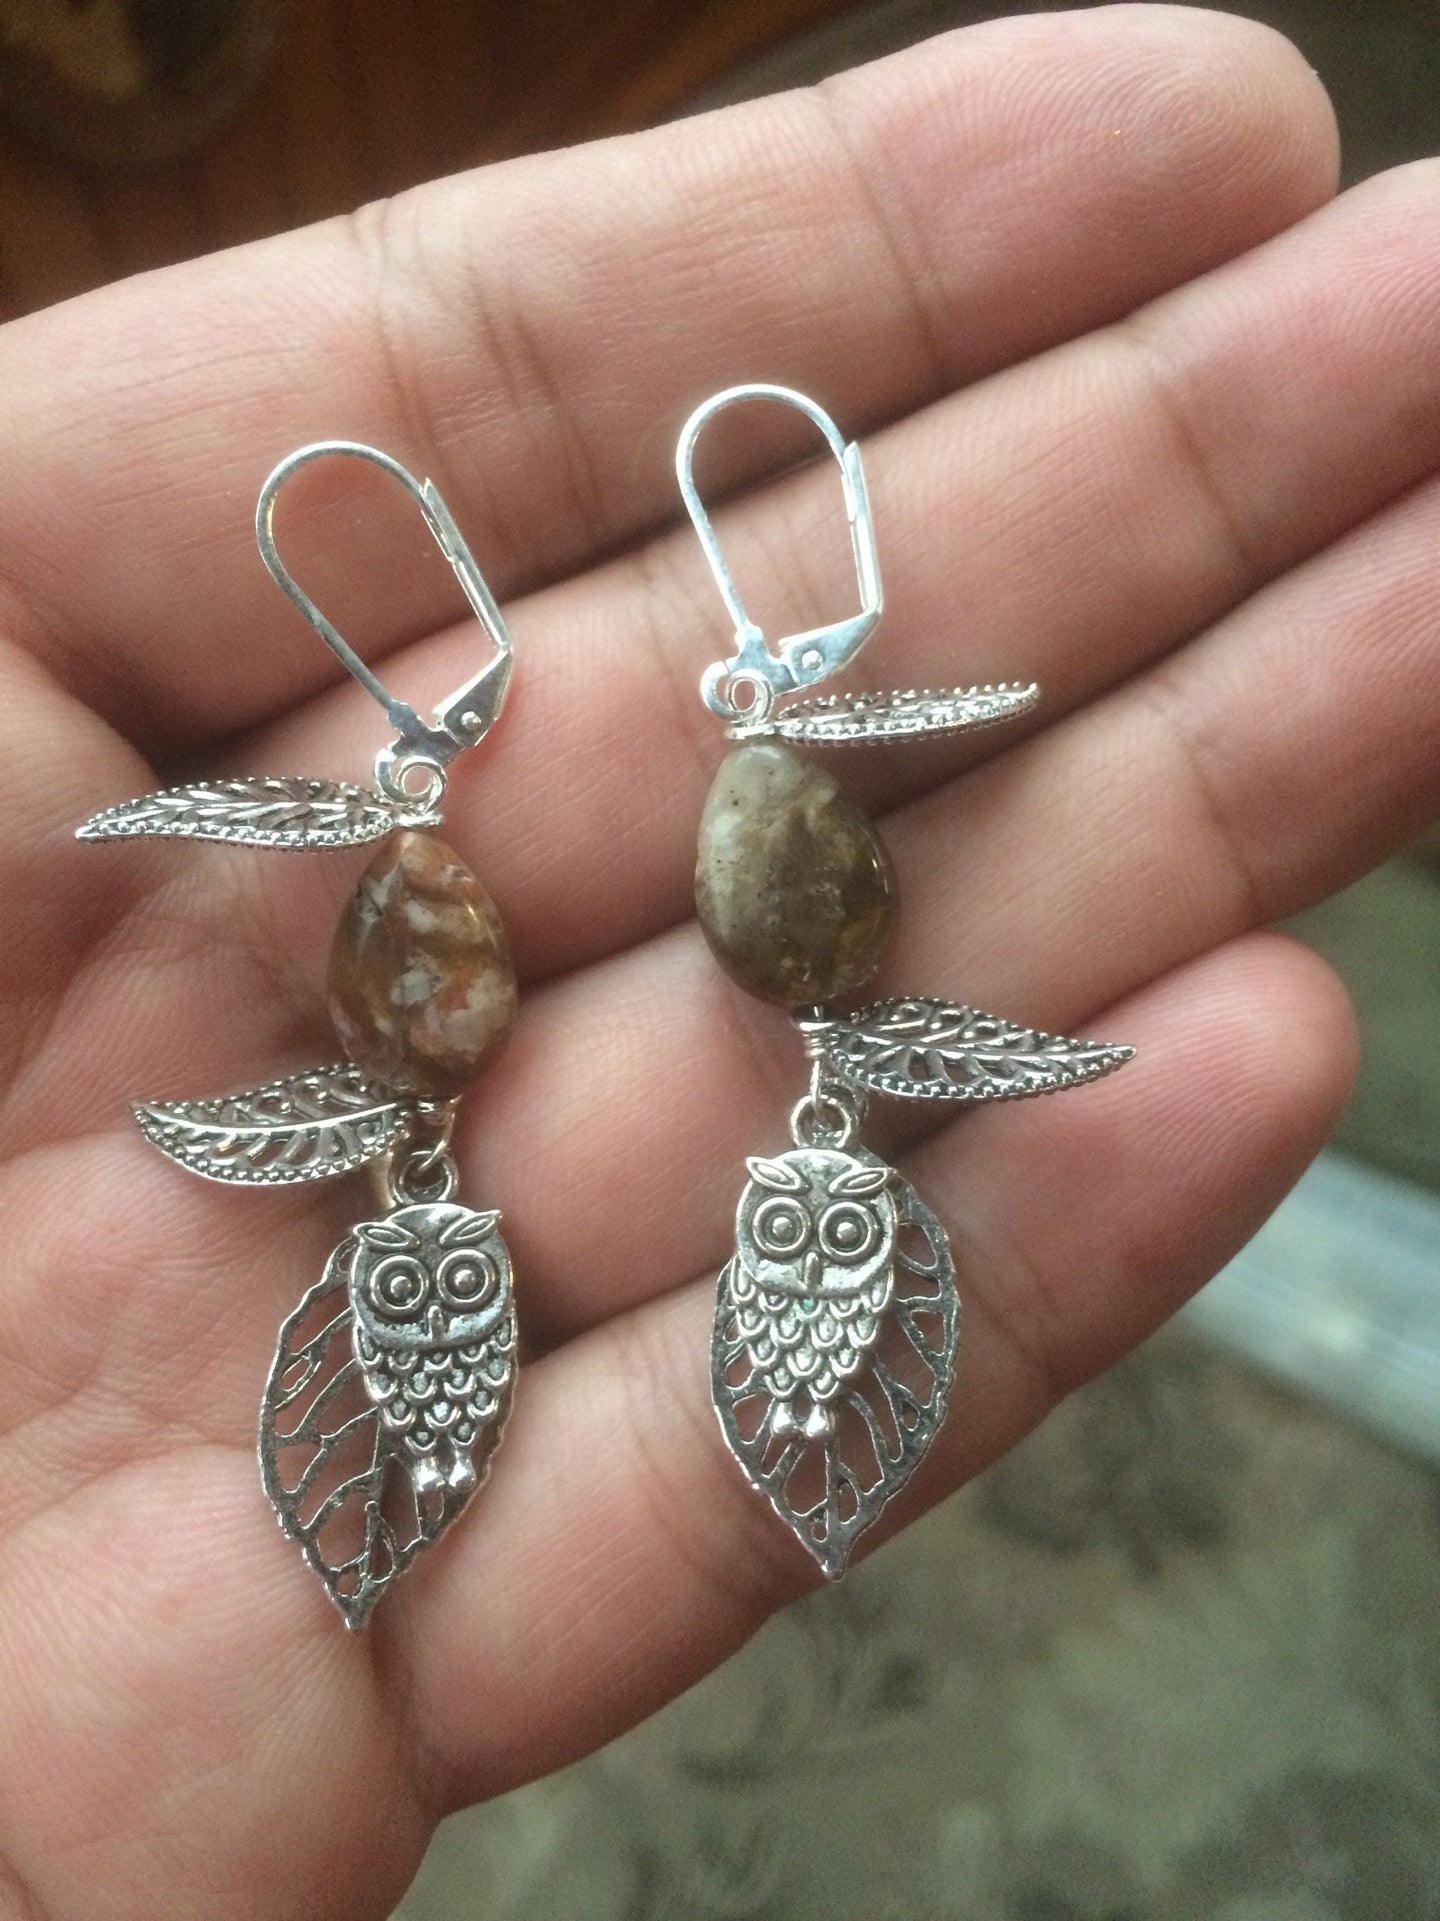 These earrings feature a metal owl dangling below falling metal leaves. This forms a matching set with necklace 1NCK0029.